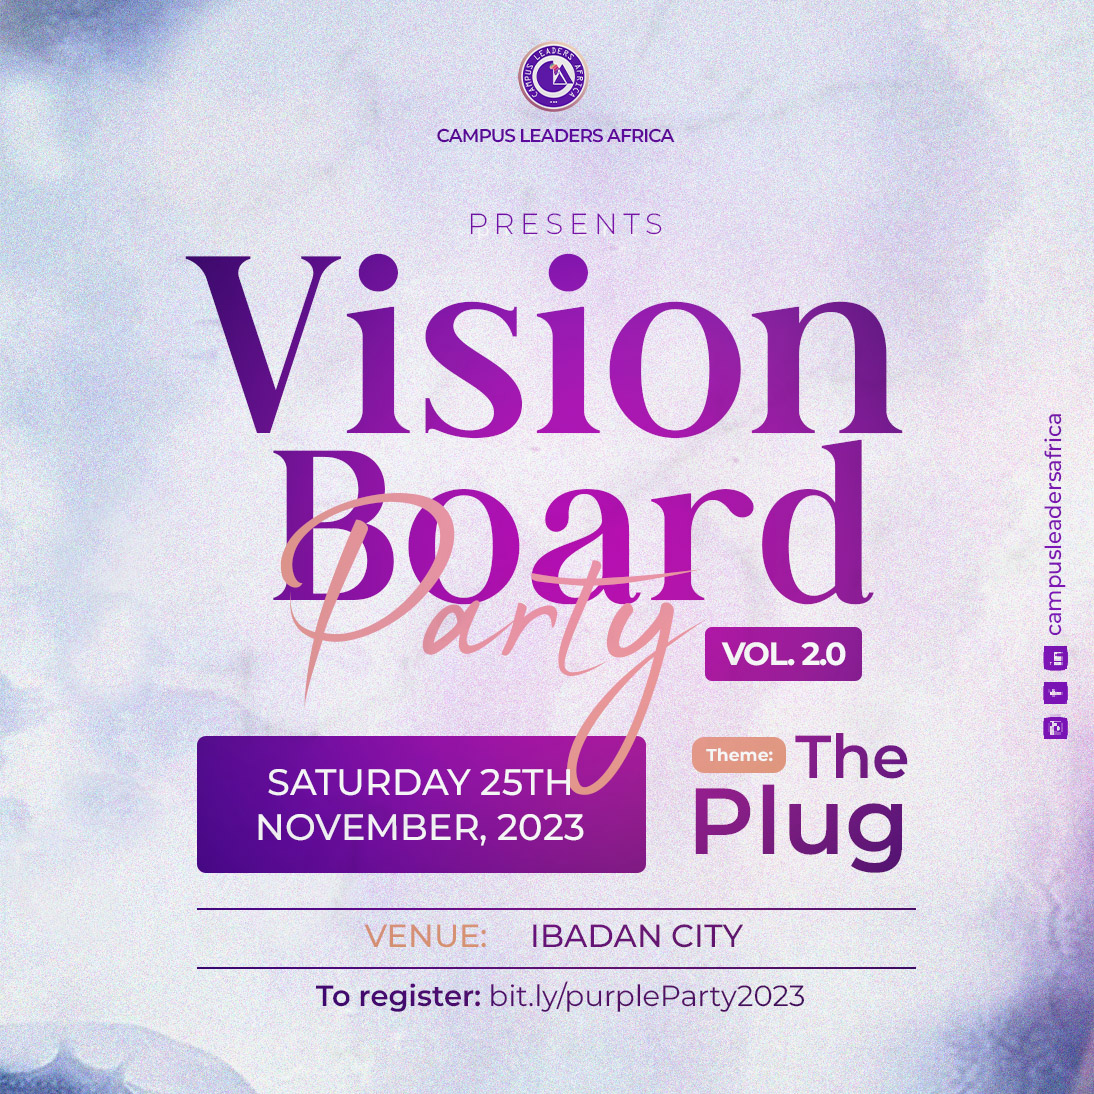 Vision Board Party Post free event in Nigeria using tickethub.ng, buy and sell tickets to event